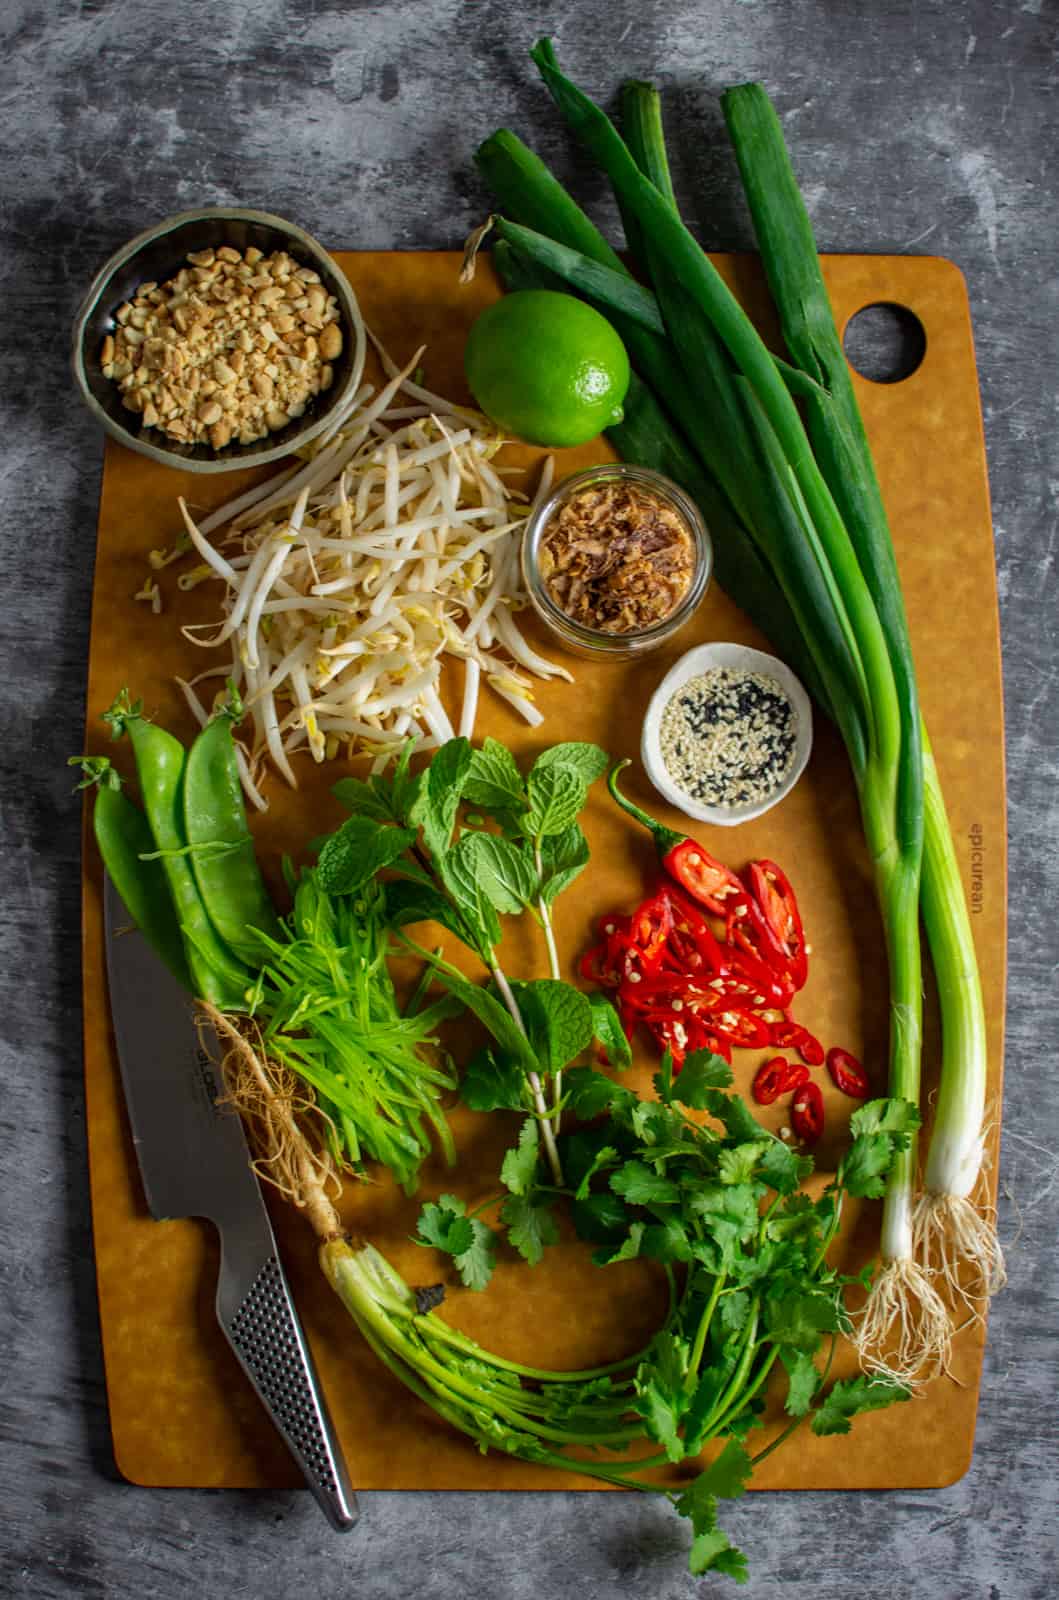 beansprout salad ingredients on a chopping board 